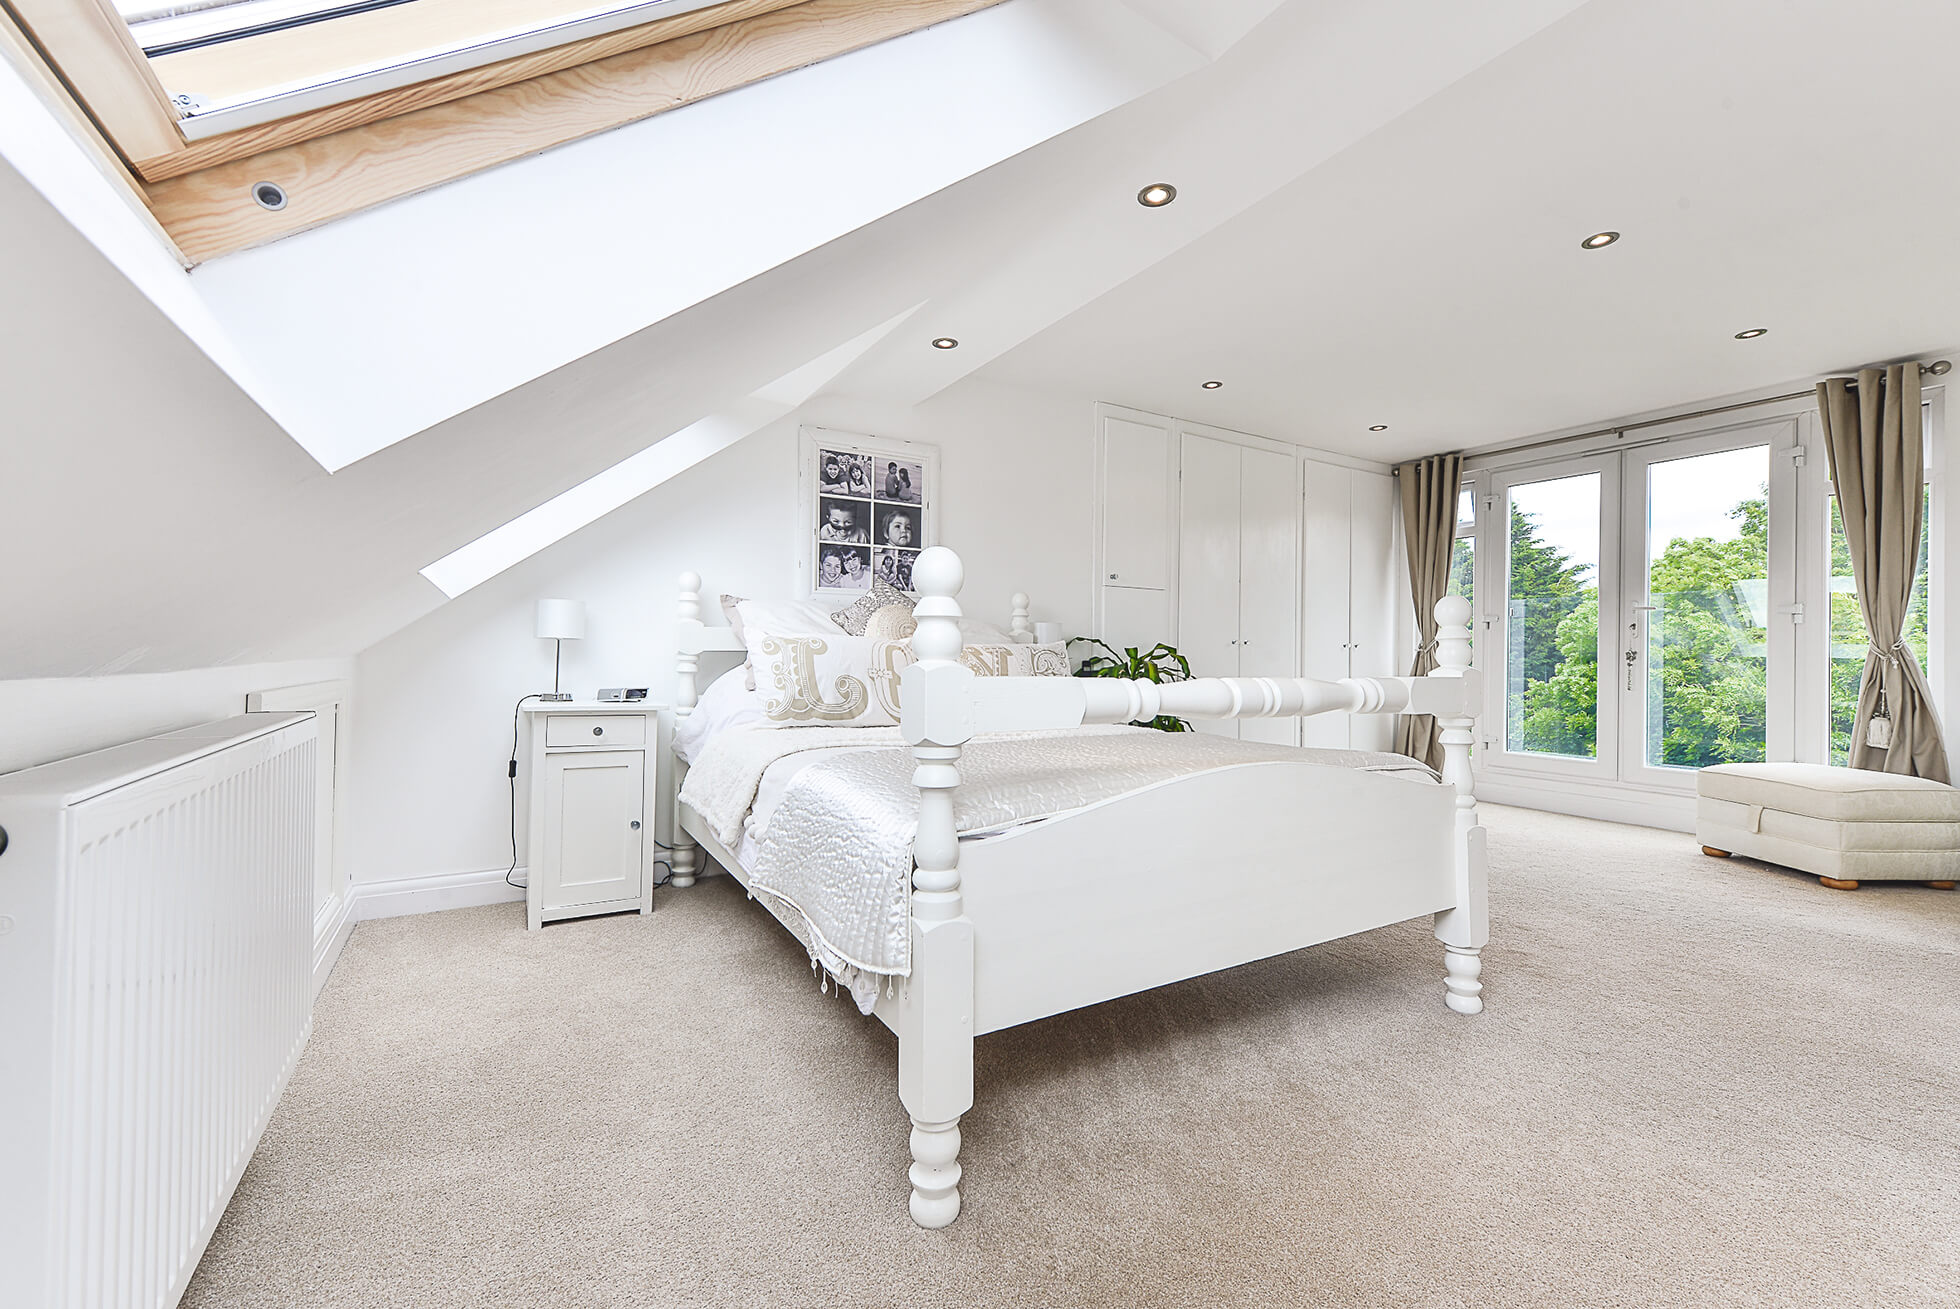 Do you have a question about converting your Loft in Westwick Row? Here are the most popular questions asked by our clients.